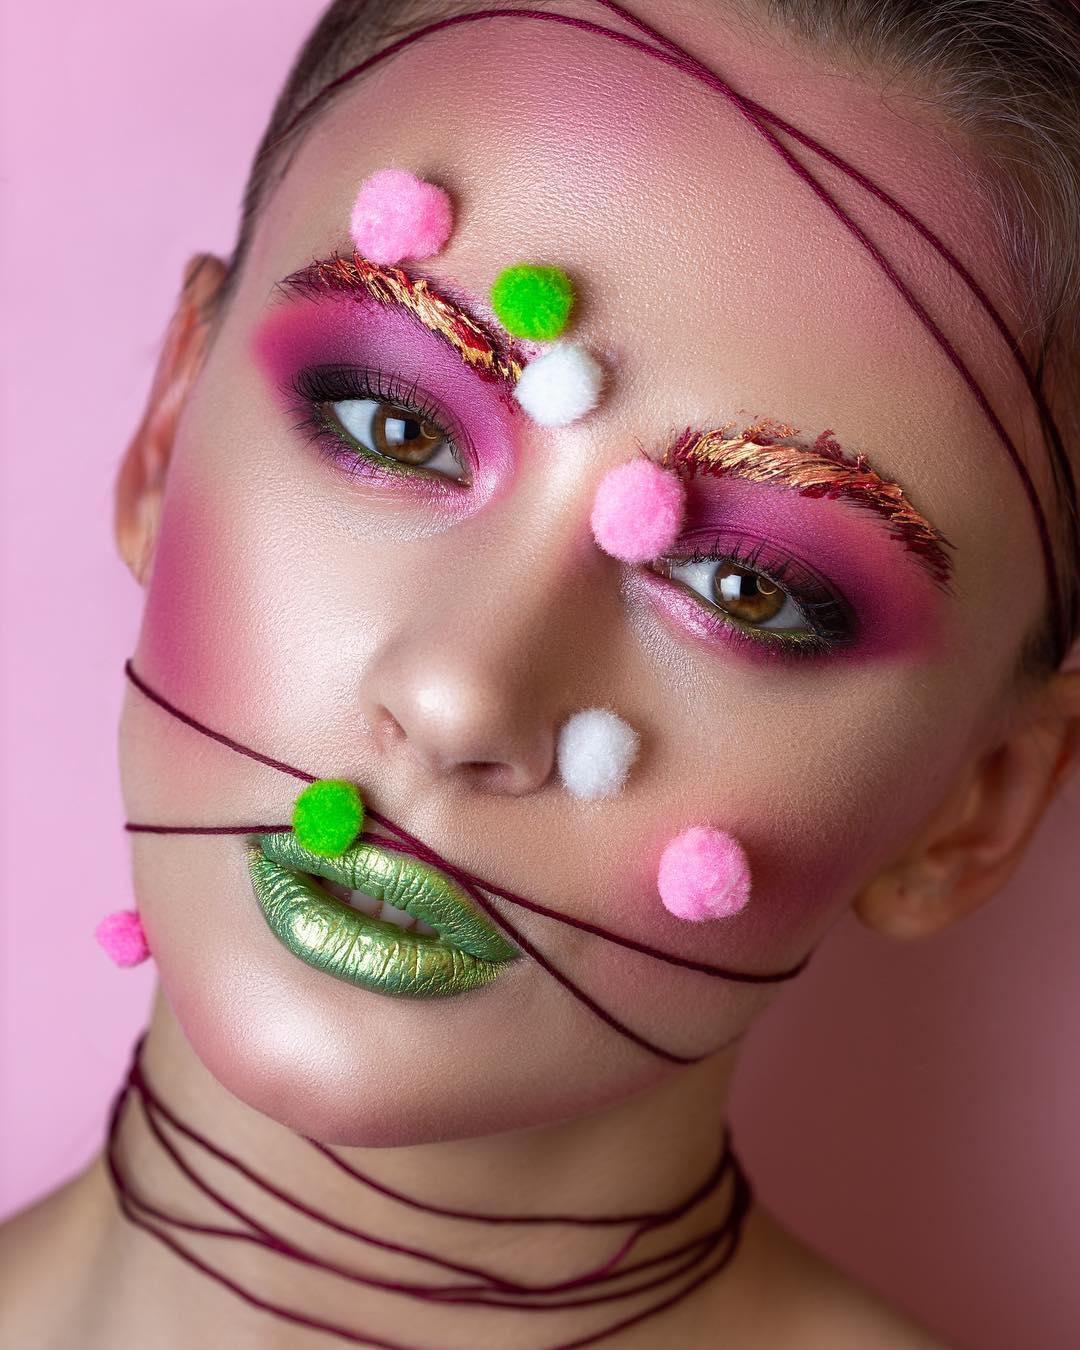 Lady With Green Lips And Pink Eyeshadows